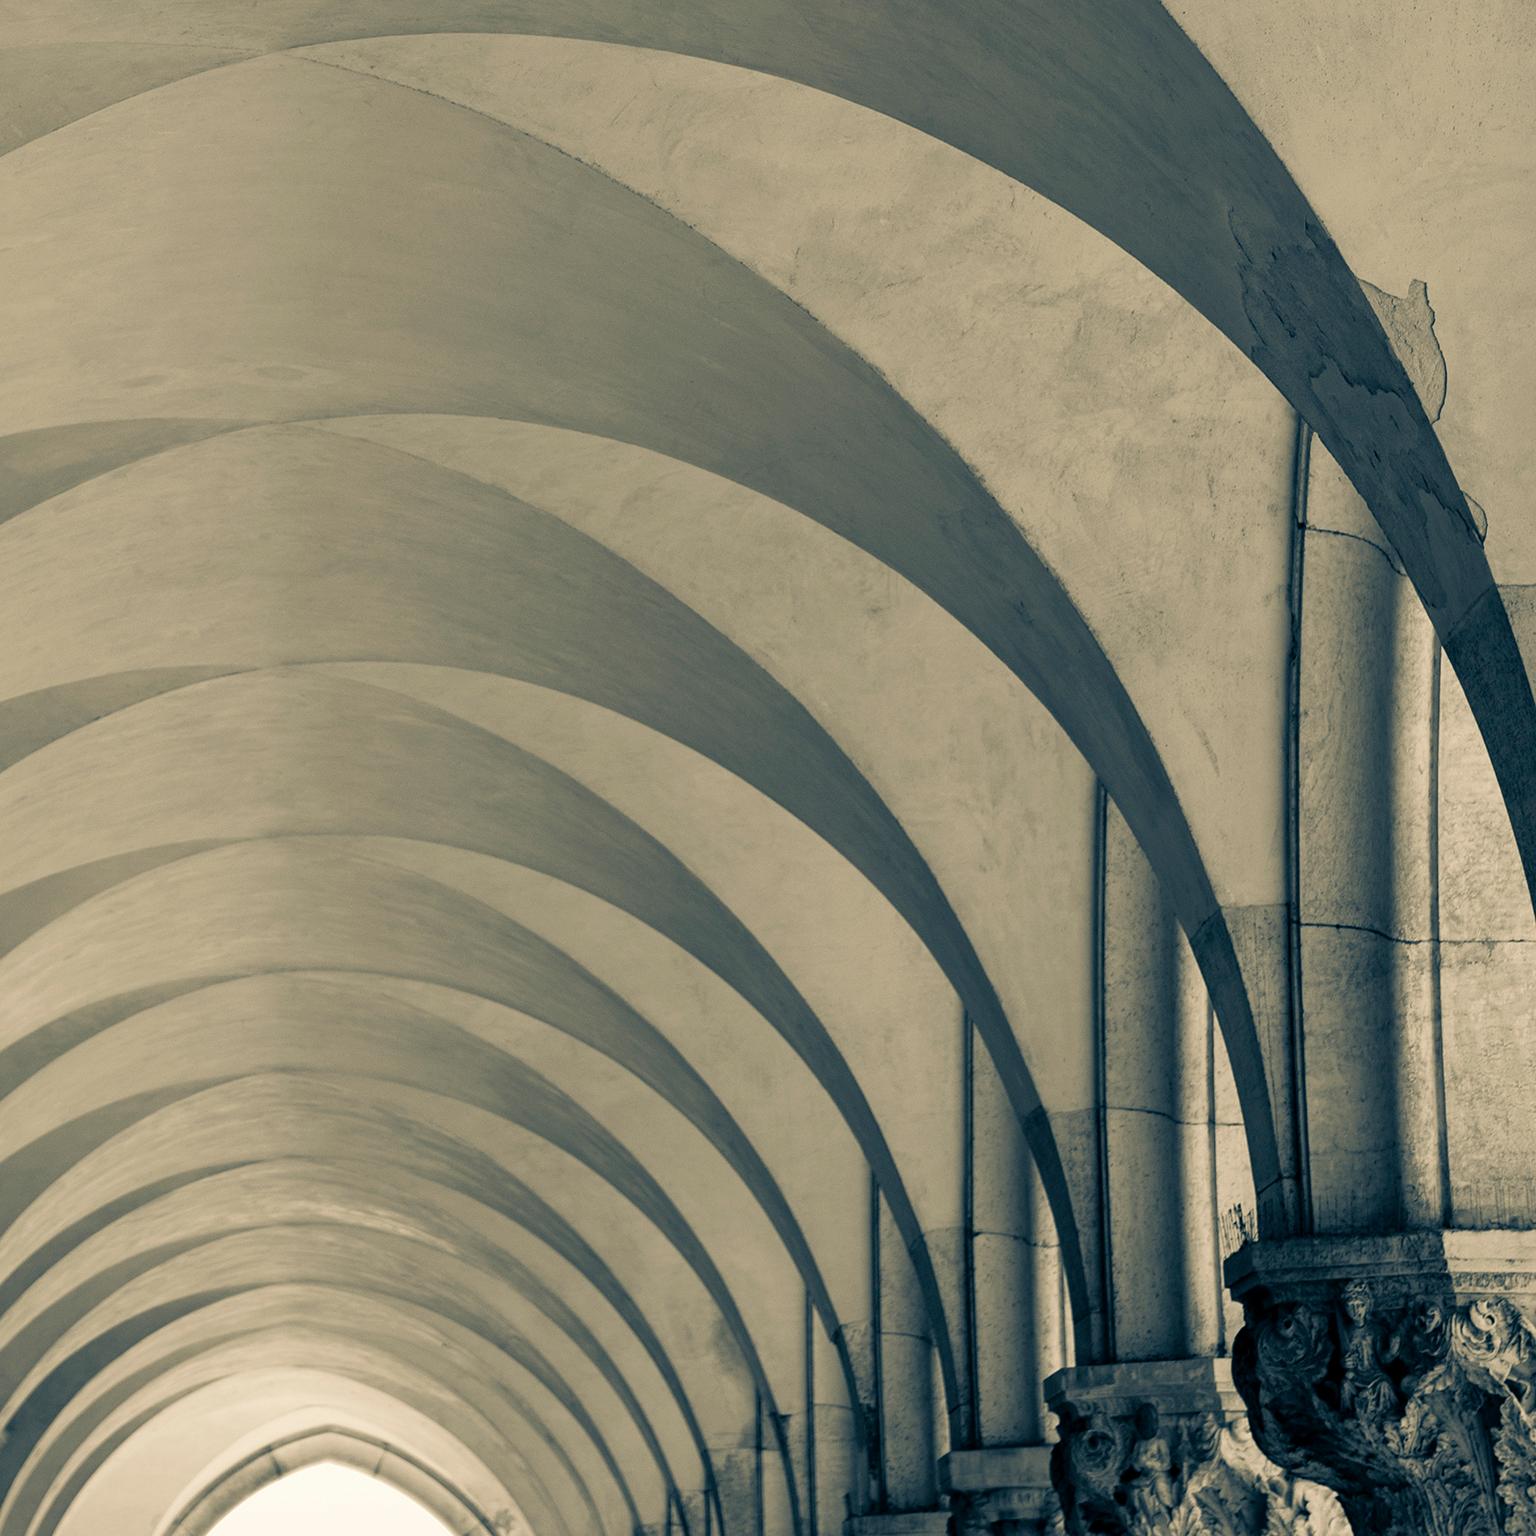 Doges Palace Colonnade, Venice, Italy 2018
Photograph by Cosmo Condina. Arched vaulted ceiling.
Archival pigment print 19 X 12.6 in. Edition of 10. This is # 3/10 in the edition.

Detail of Venetian Gothic architecture of the colonnade at the Doges